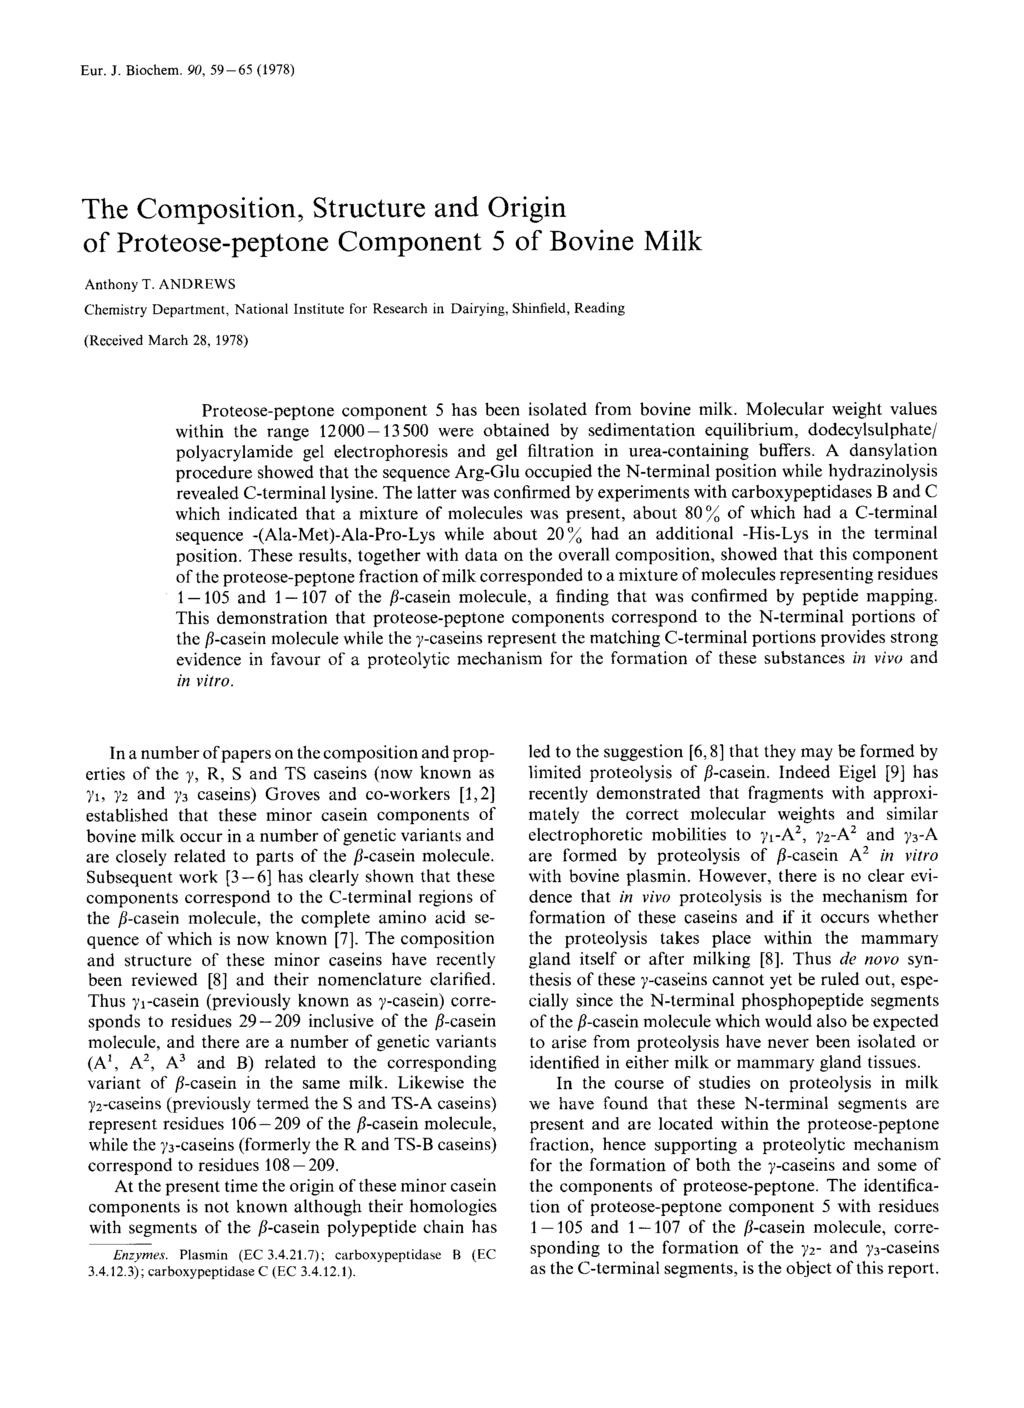 Eur. J. Biochem. 9, 59-65 (1978) The Composition, Structure and Origin of Proteose-peptone Component 5 of Bovine Milk Anthony T.